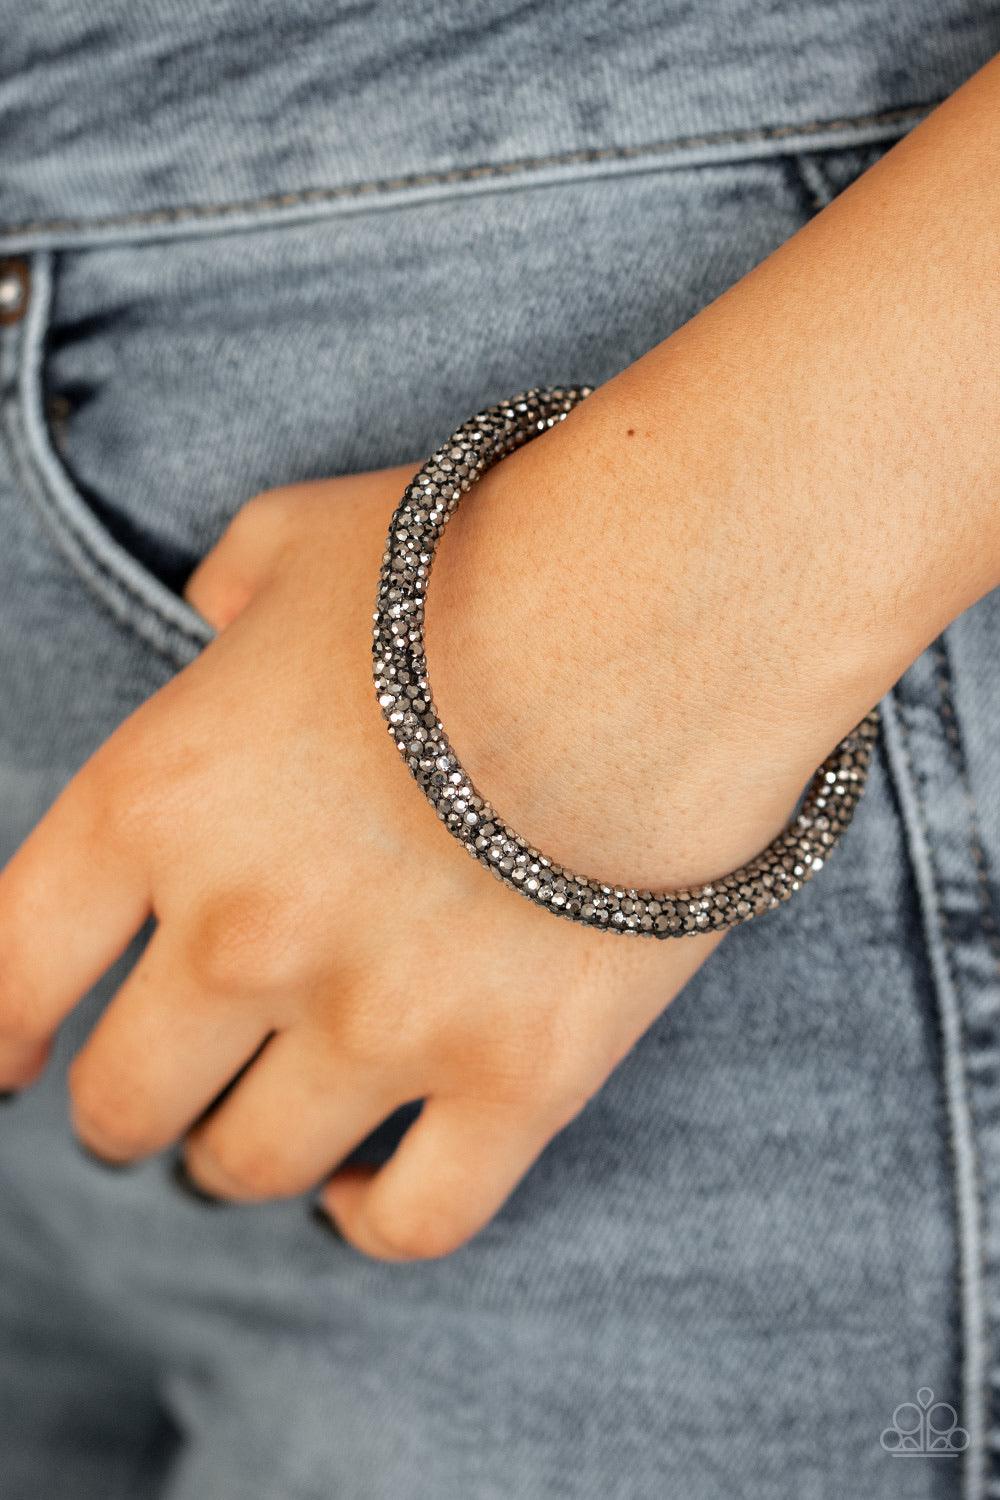 Paparazzi Accessories Stageworthy Sparkle - Black Bedazzled in glittery hematite rhinestones, a bendable cuff-like bracelet delicately curls around the wrist for a refined look. Jewelry